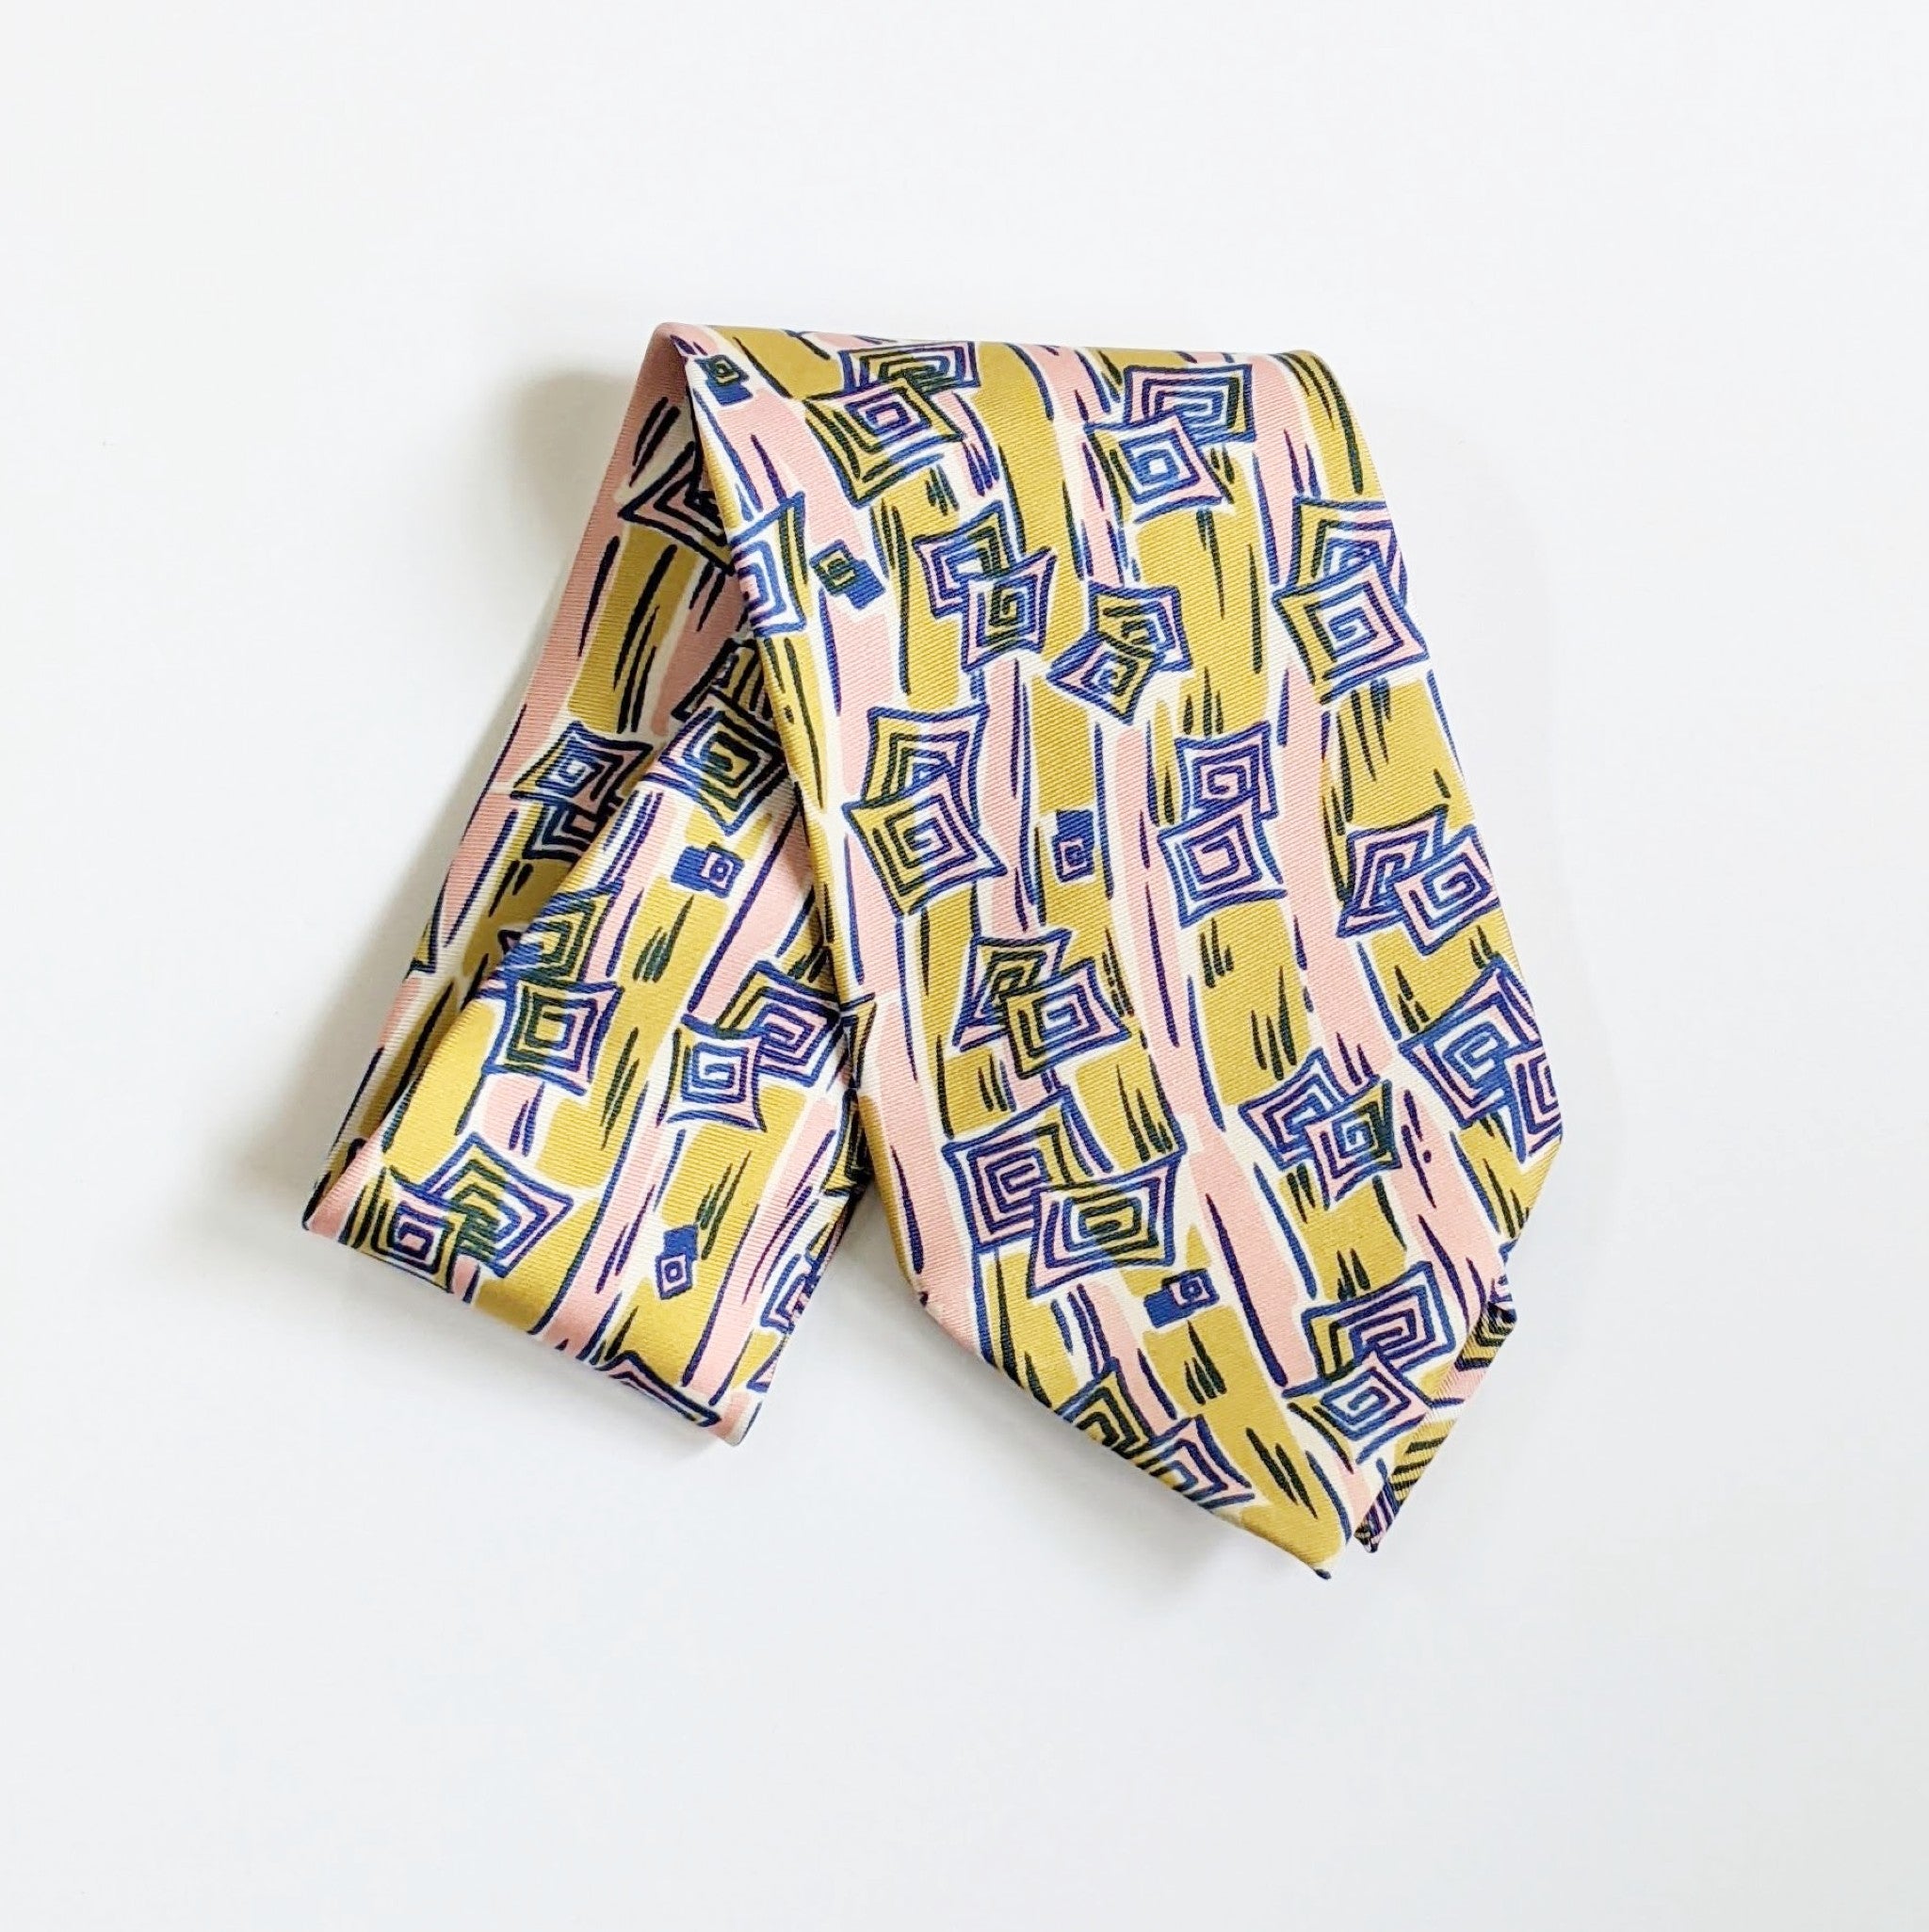 Ascot Scarf In Retro 60's Pink And Gold Print.